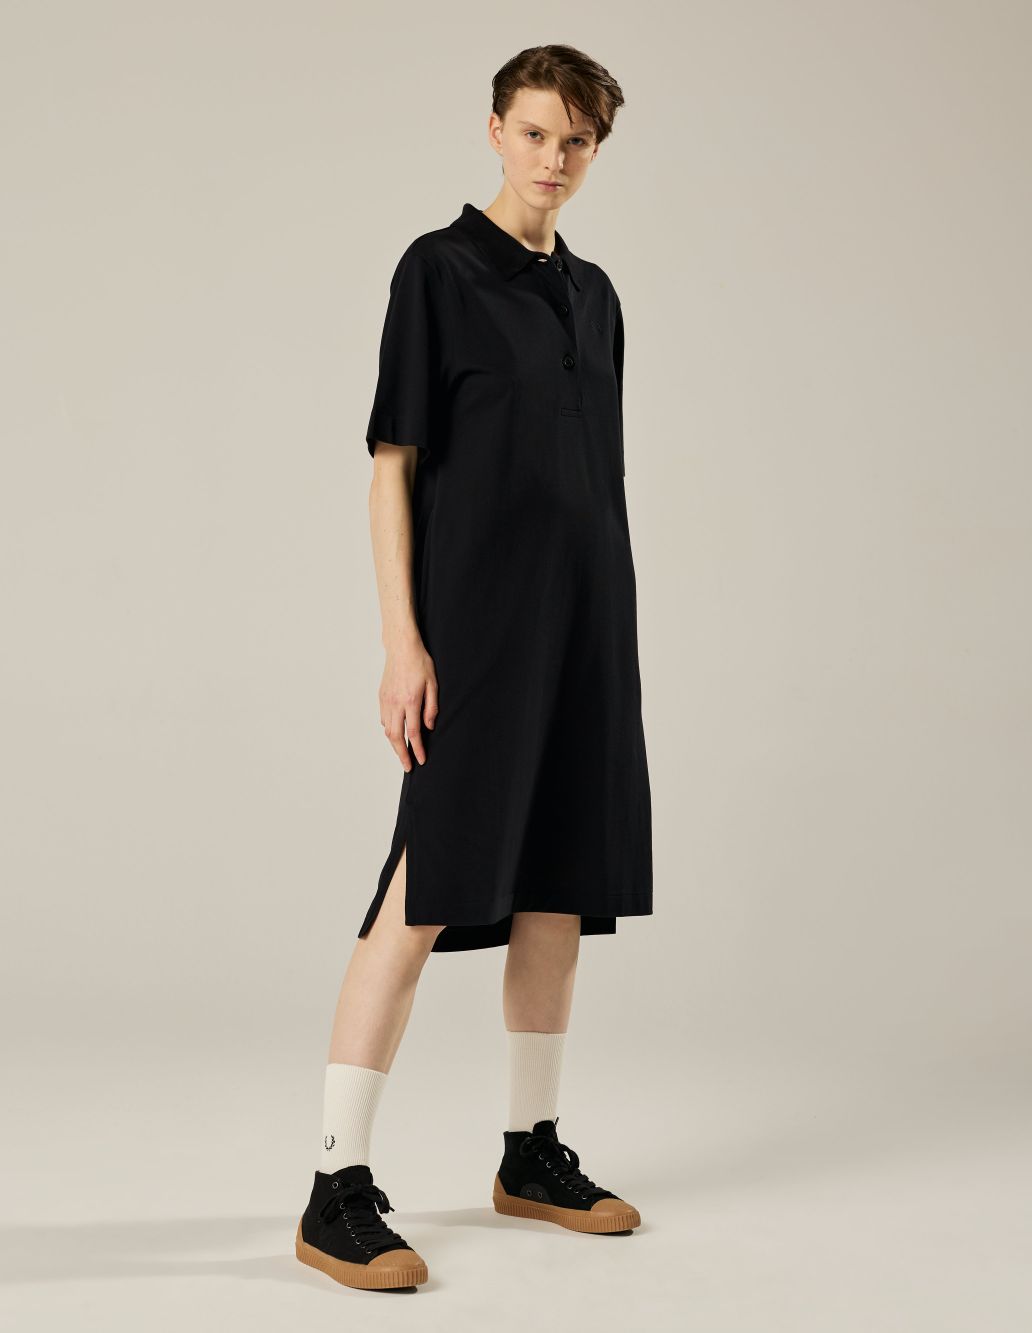 MARGARET HOWELL - Black cotton pique Fred Perry polo dress | Margaret ...